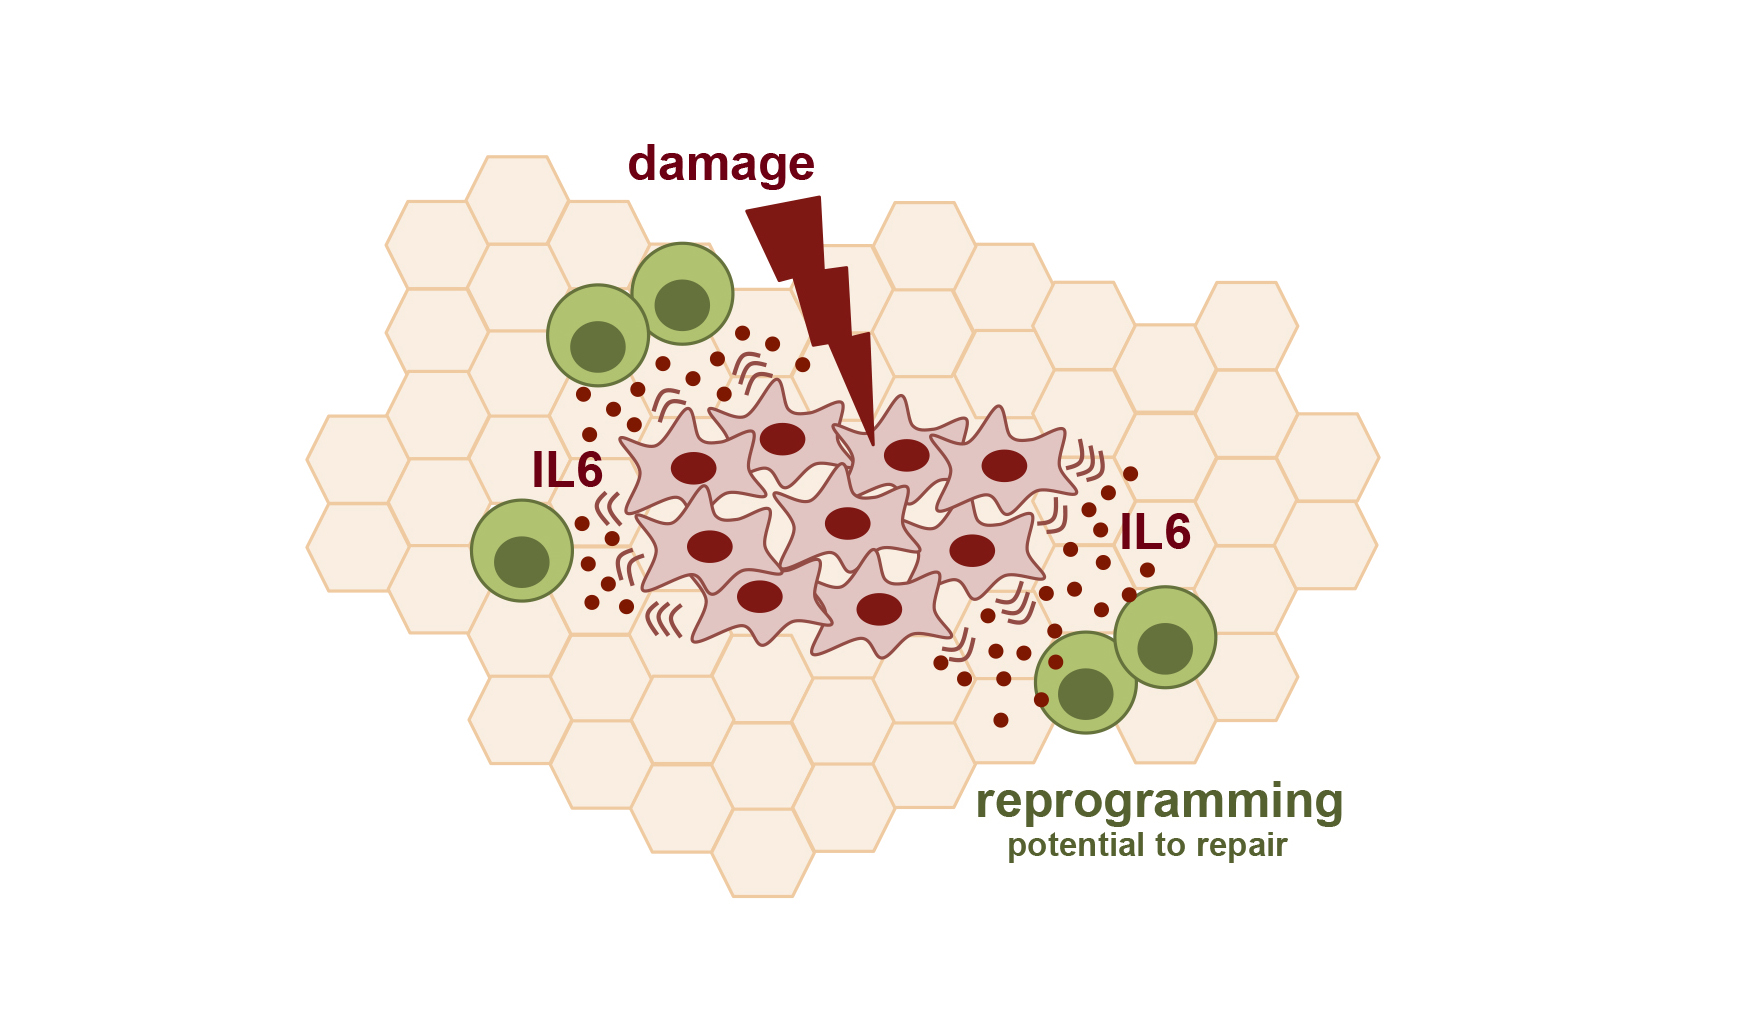 Damaged cells release factors that promote the reprogramming of neighboring cells, with interleukin-6 (IL-6) being a critical mediator. [CNIO]